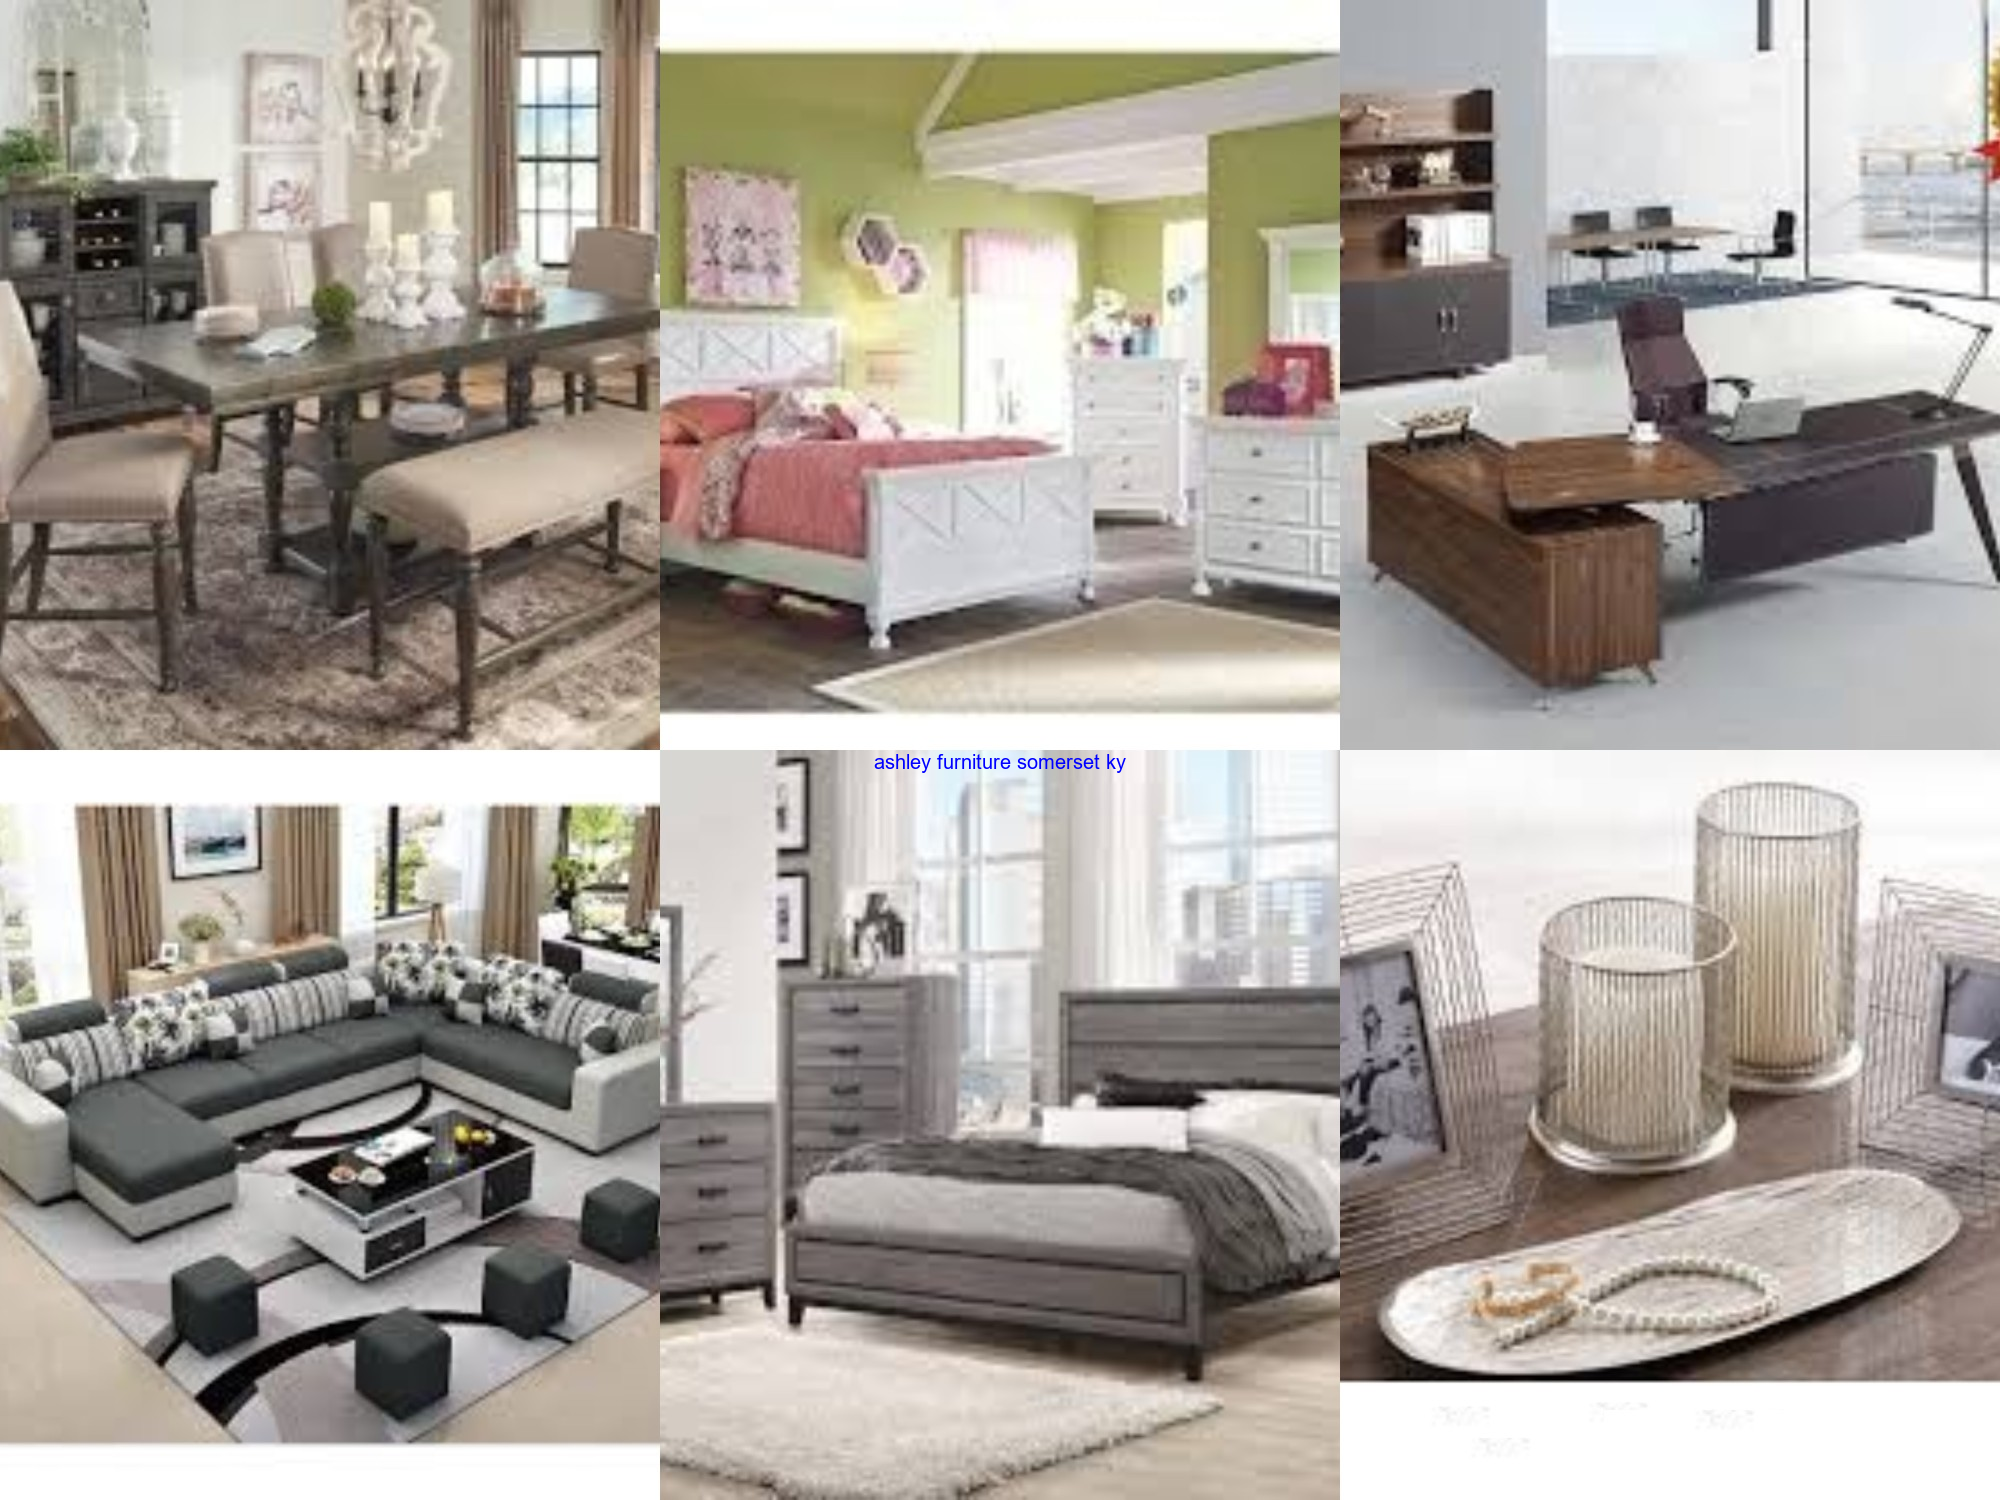 Ashley Furniture Somerset Ky - I Suggest You To Try This Web intended for Ashley Furniture Somerset Ky